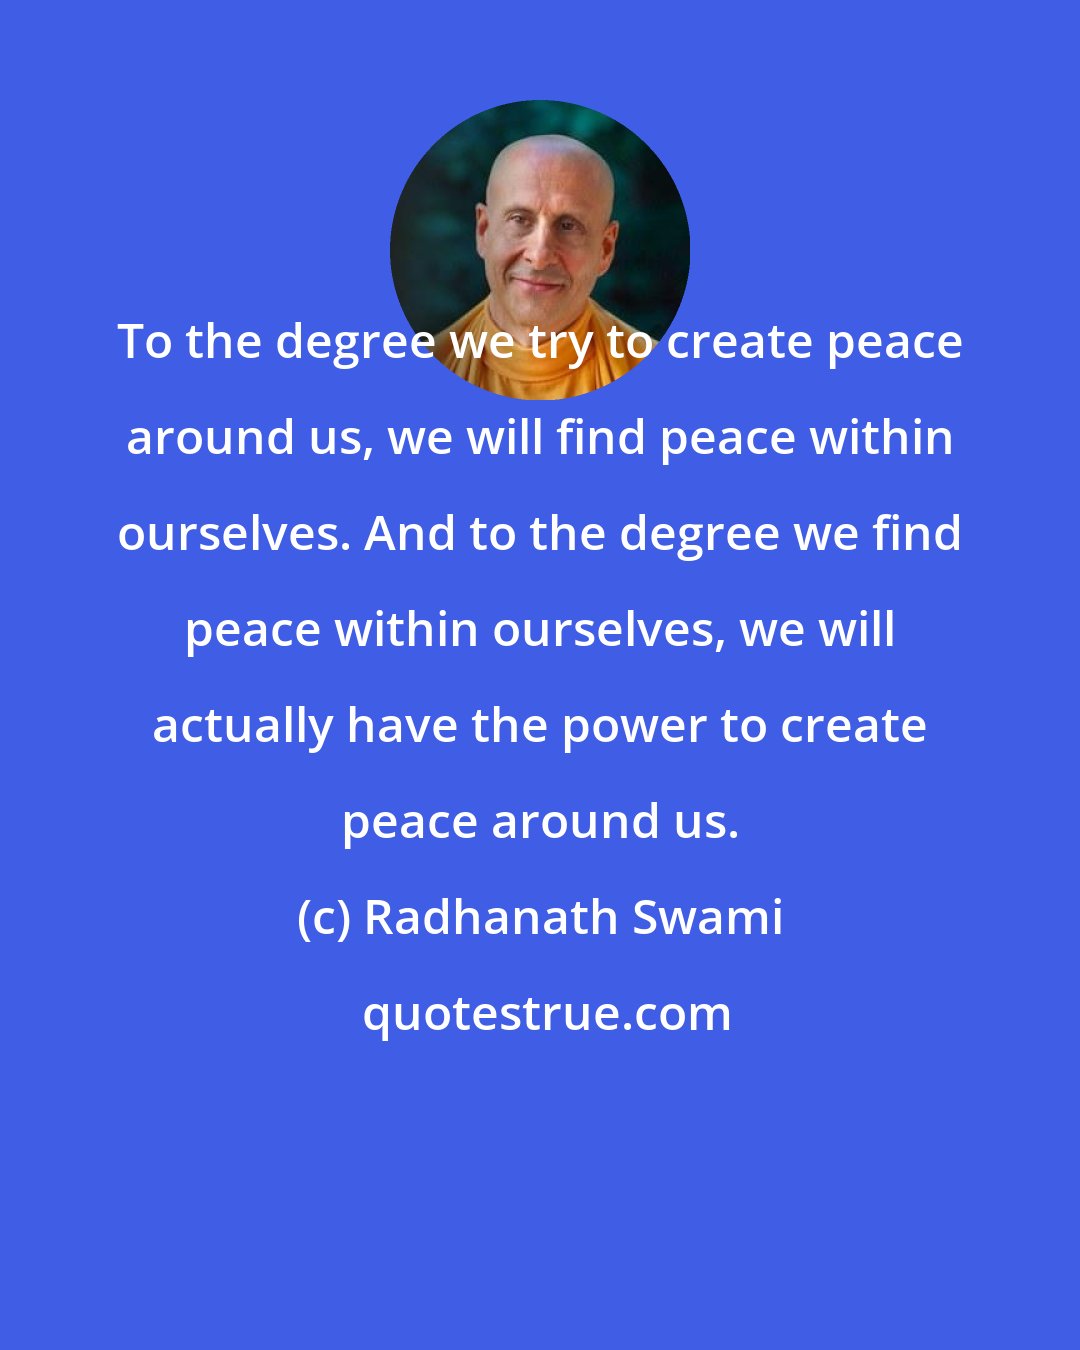 Radhanath Swami: To the degree we try to create peace around us, we will find peace within ourselves. And to the degree we find peace within ourselves, we will actually have the power to create peace around us.